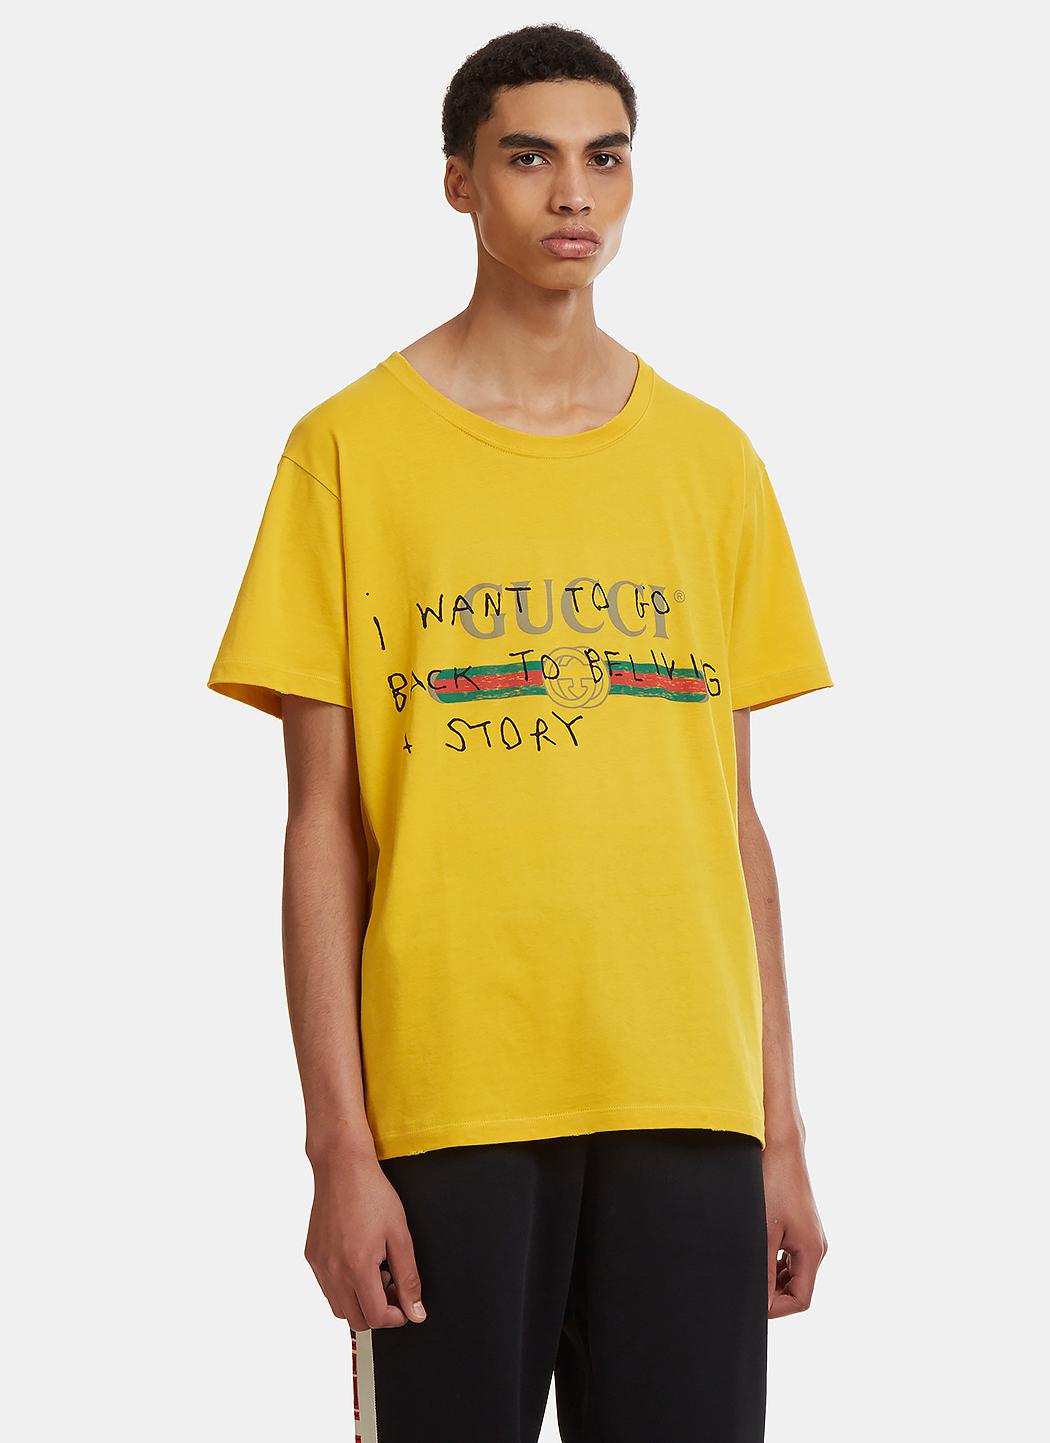 Gucci Story T-shirt In Yellow for Men - Lyst